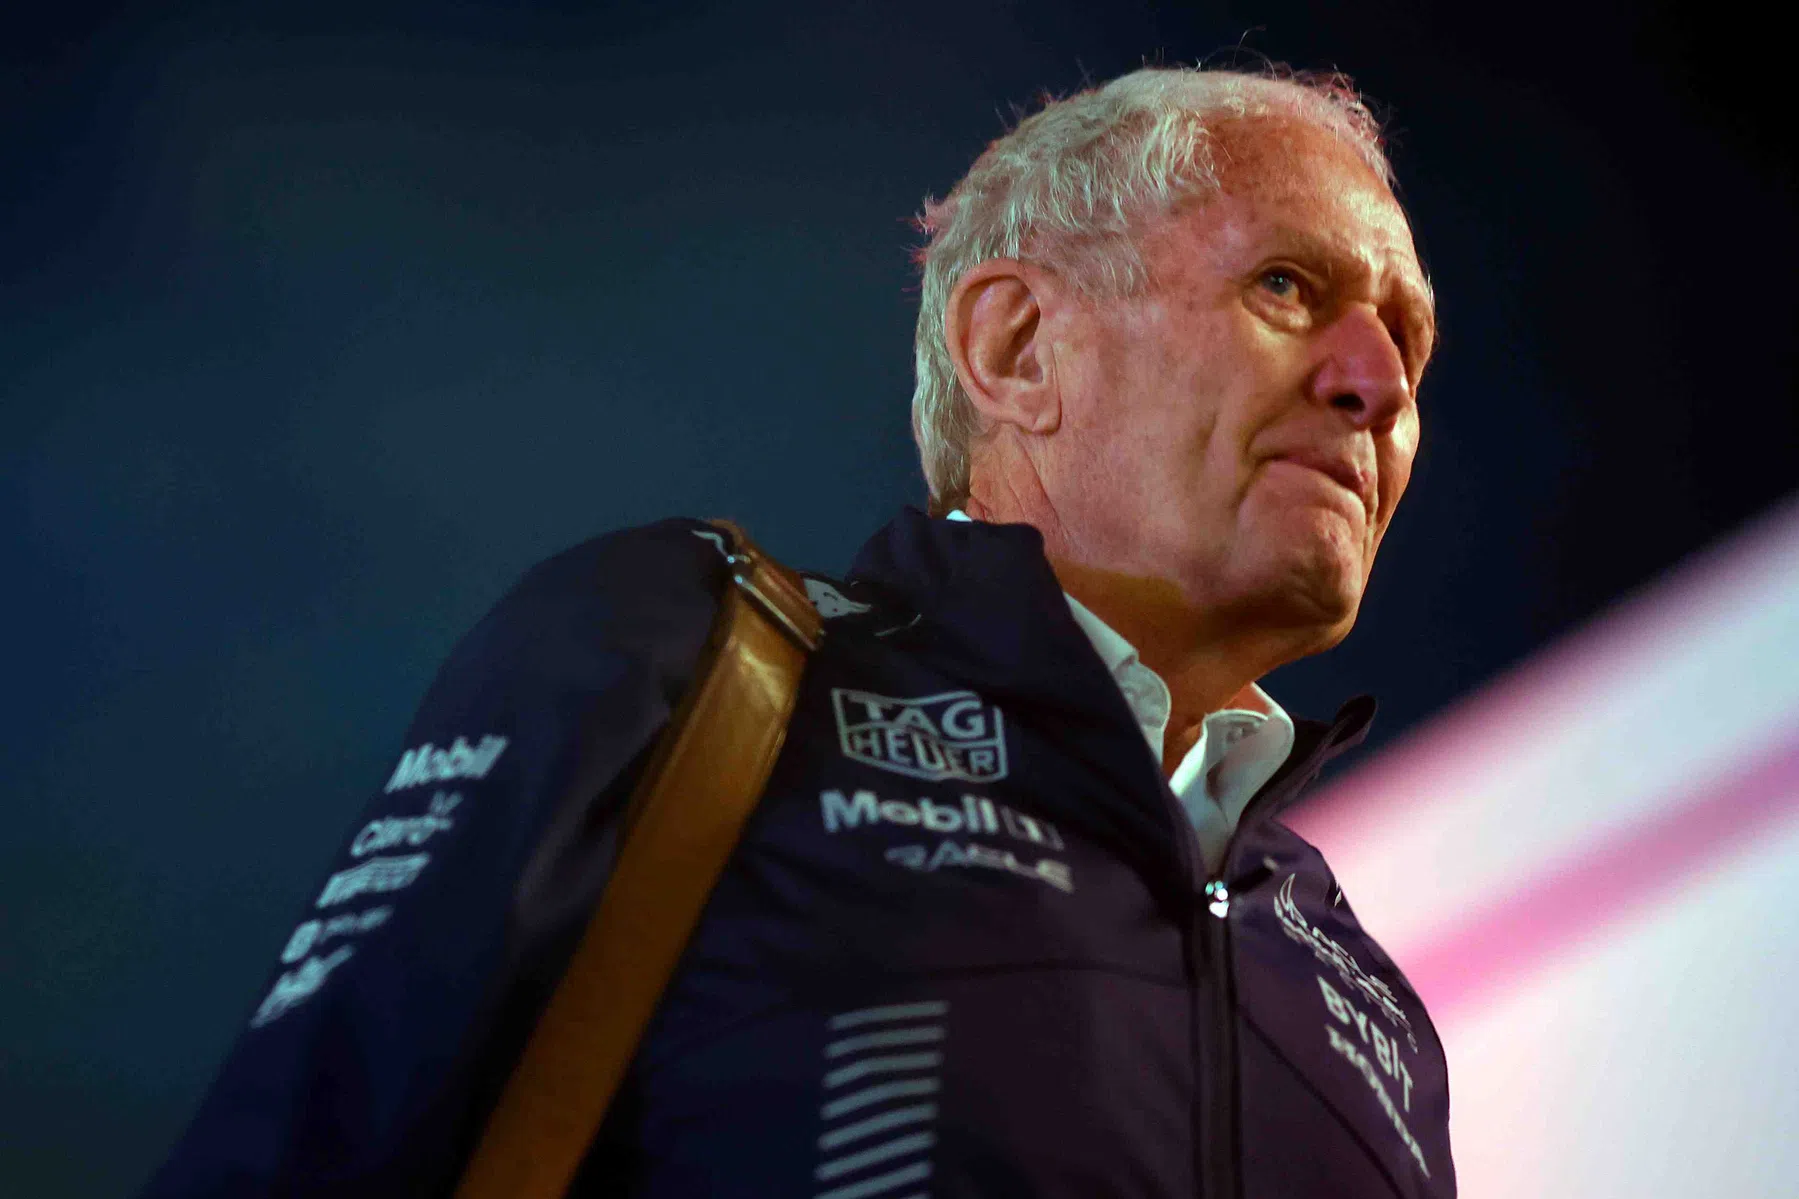 helmut marko on lewis hamilton contact with red bull